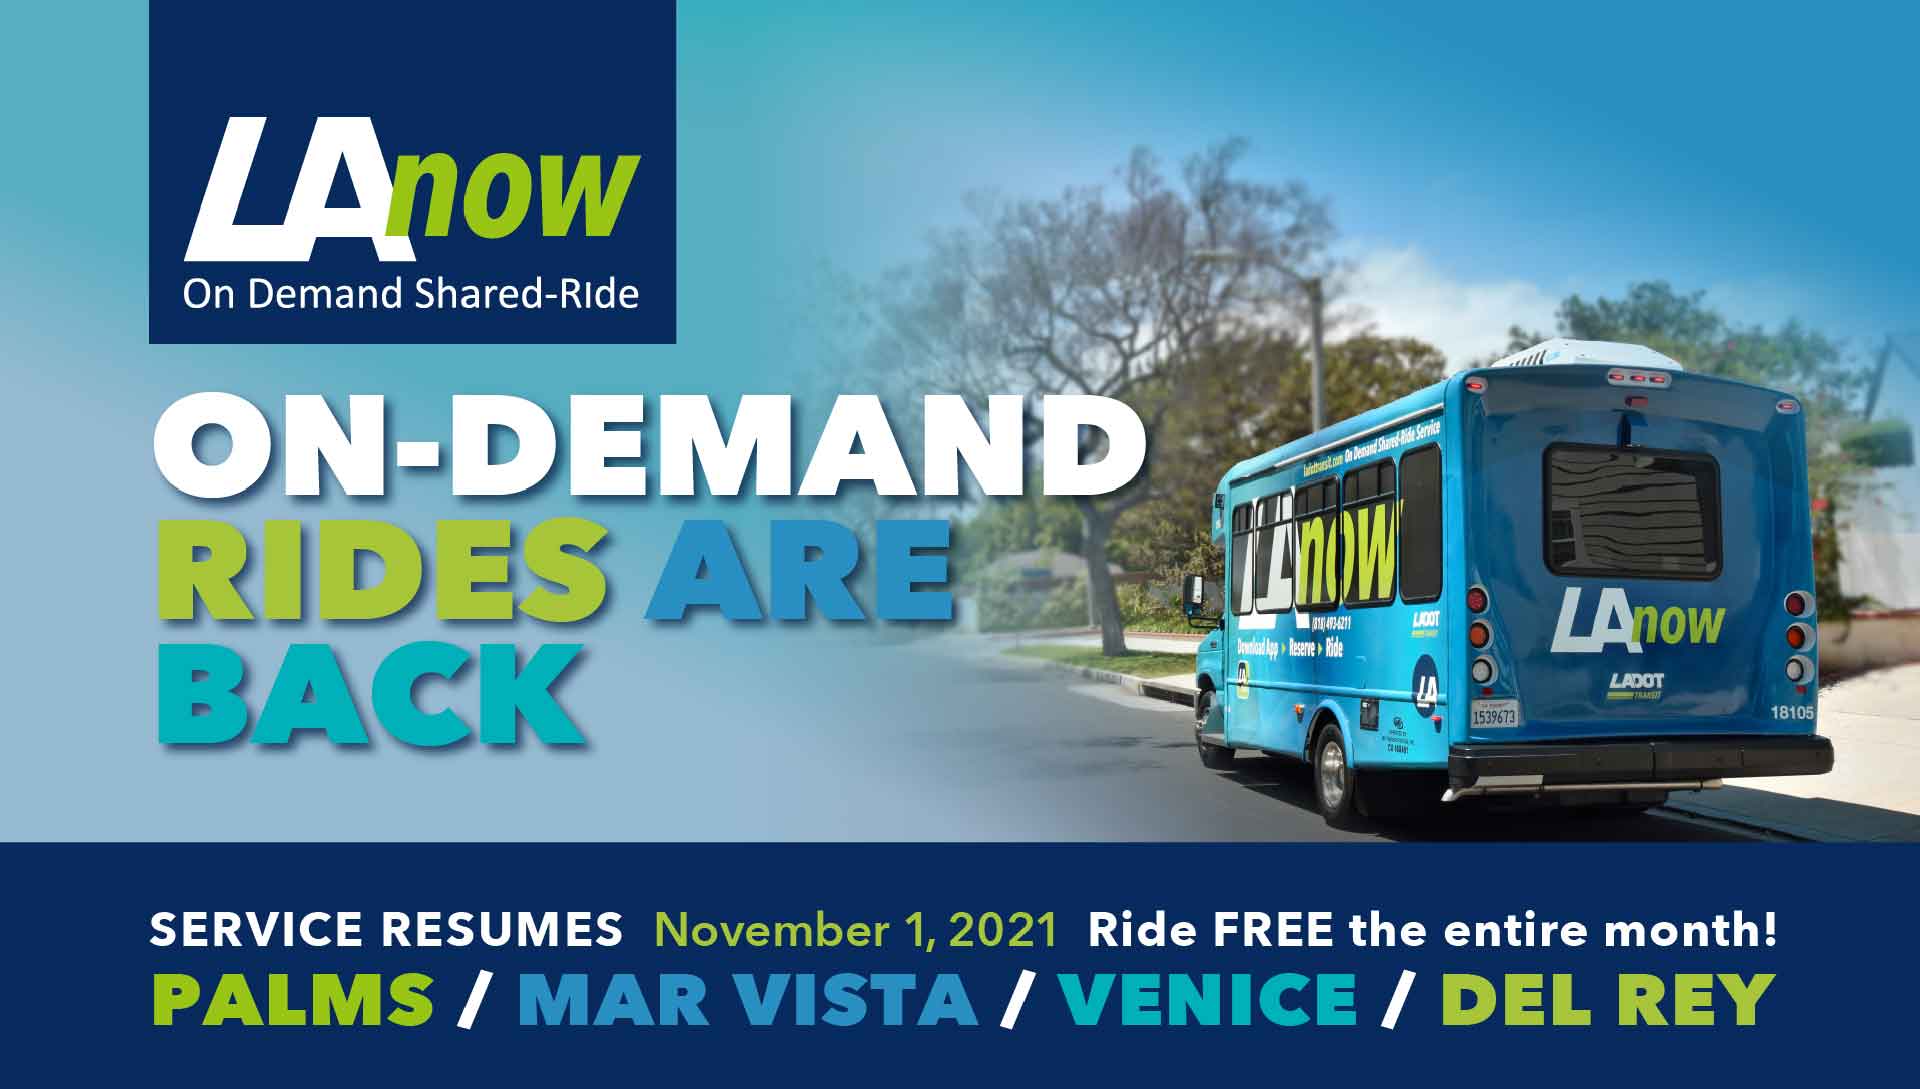 LADOT Announces Return of LAnow Service, the On-Demand, Shared